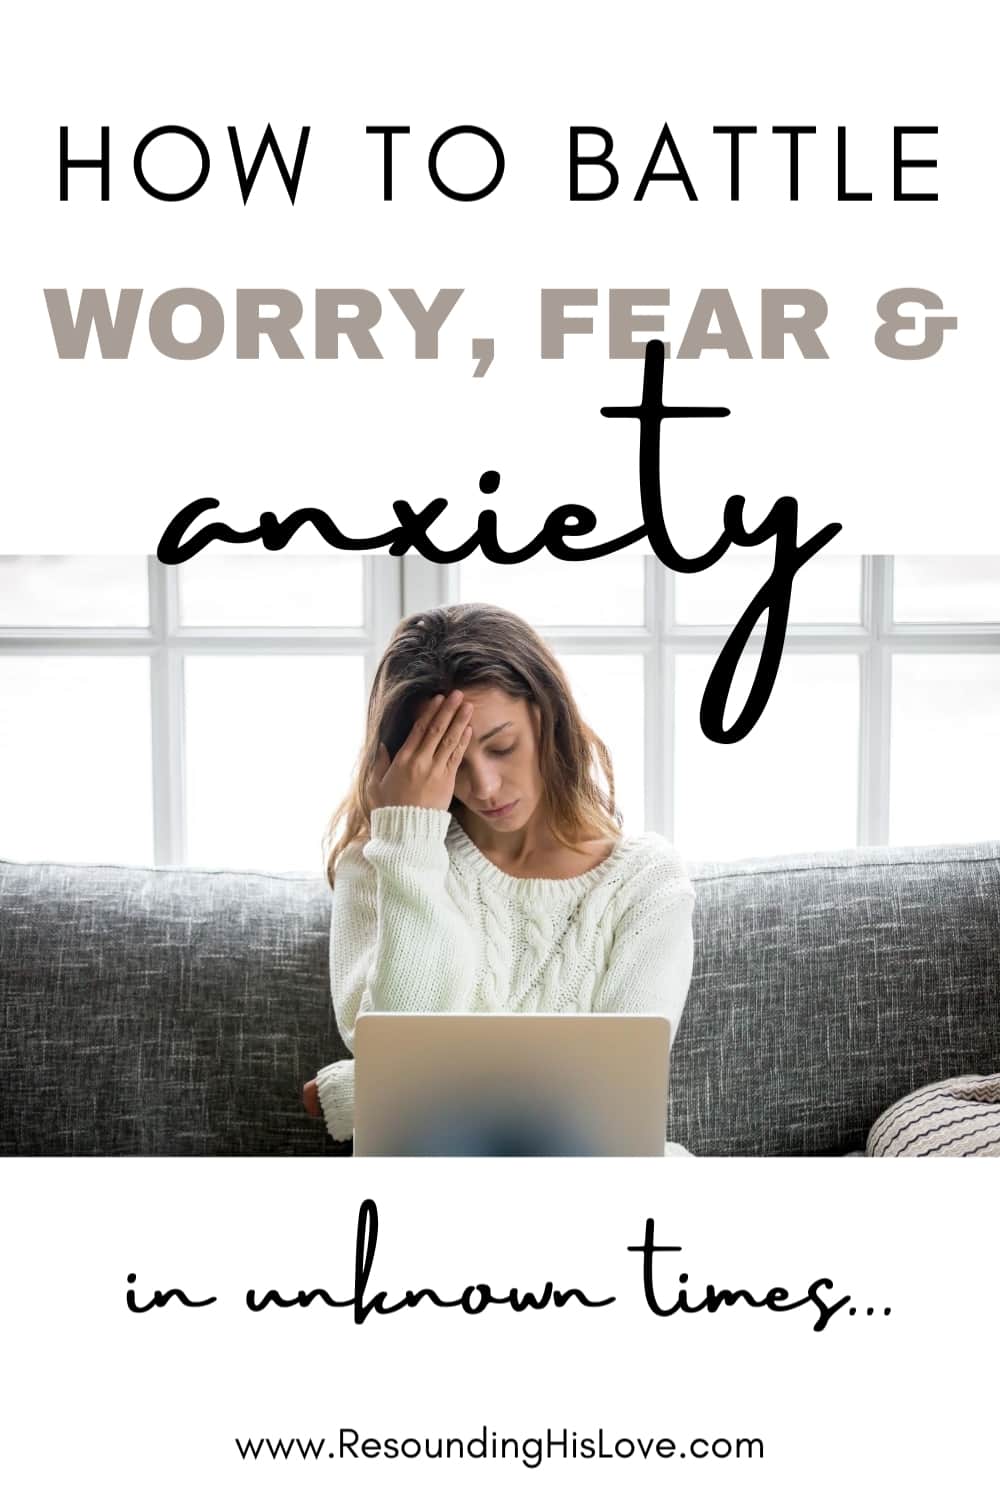 an image of a woman sitting on a gray couch holding a white computer with her hand placed on her forehead with text What Does the Bible Say About Fear?